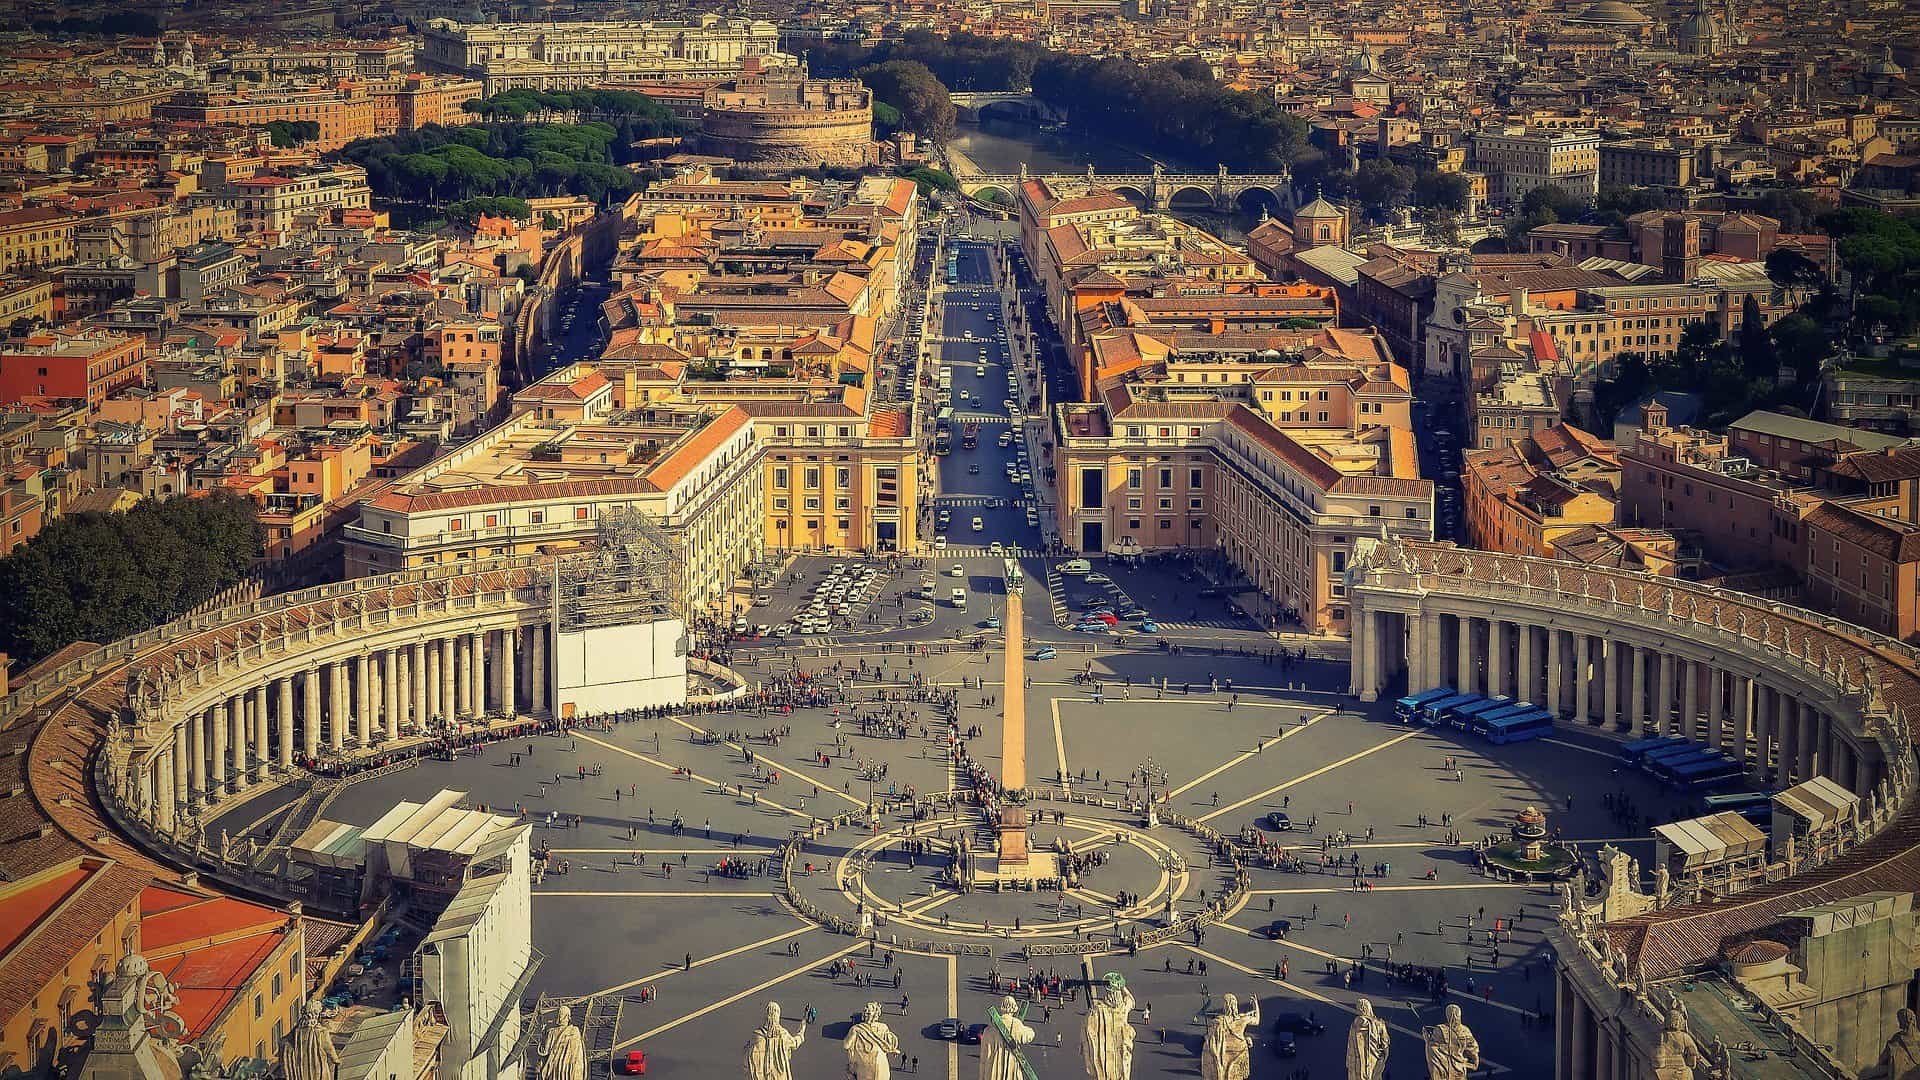 A view of Rome is seen from high above.